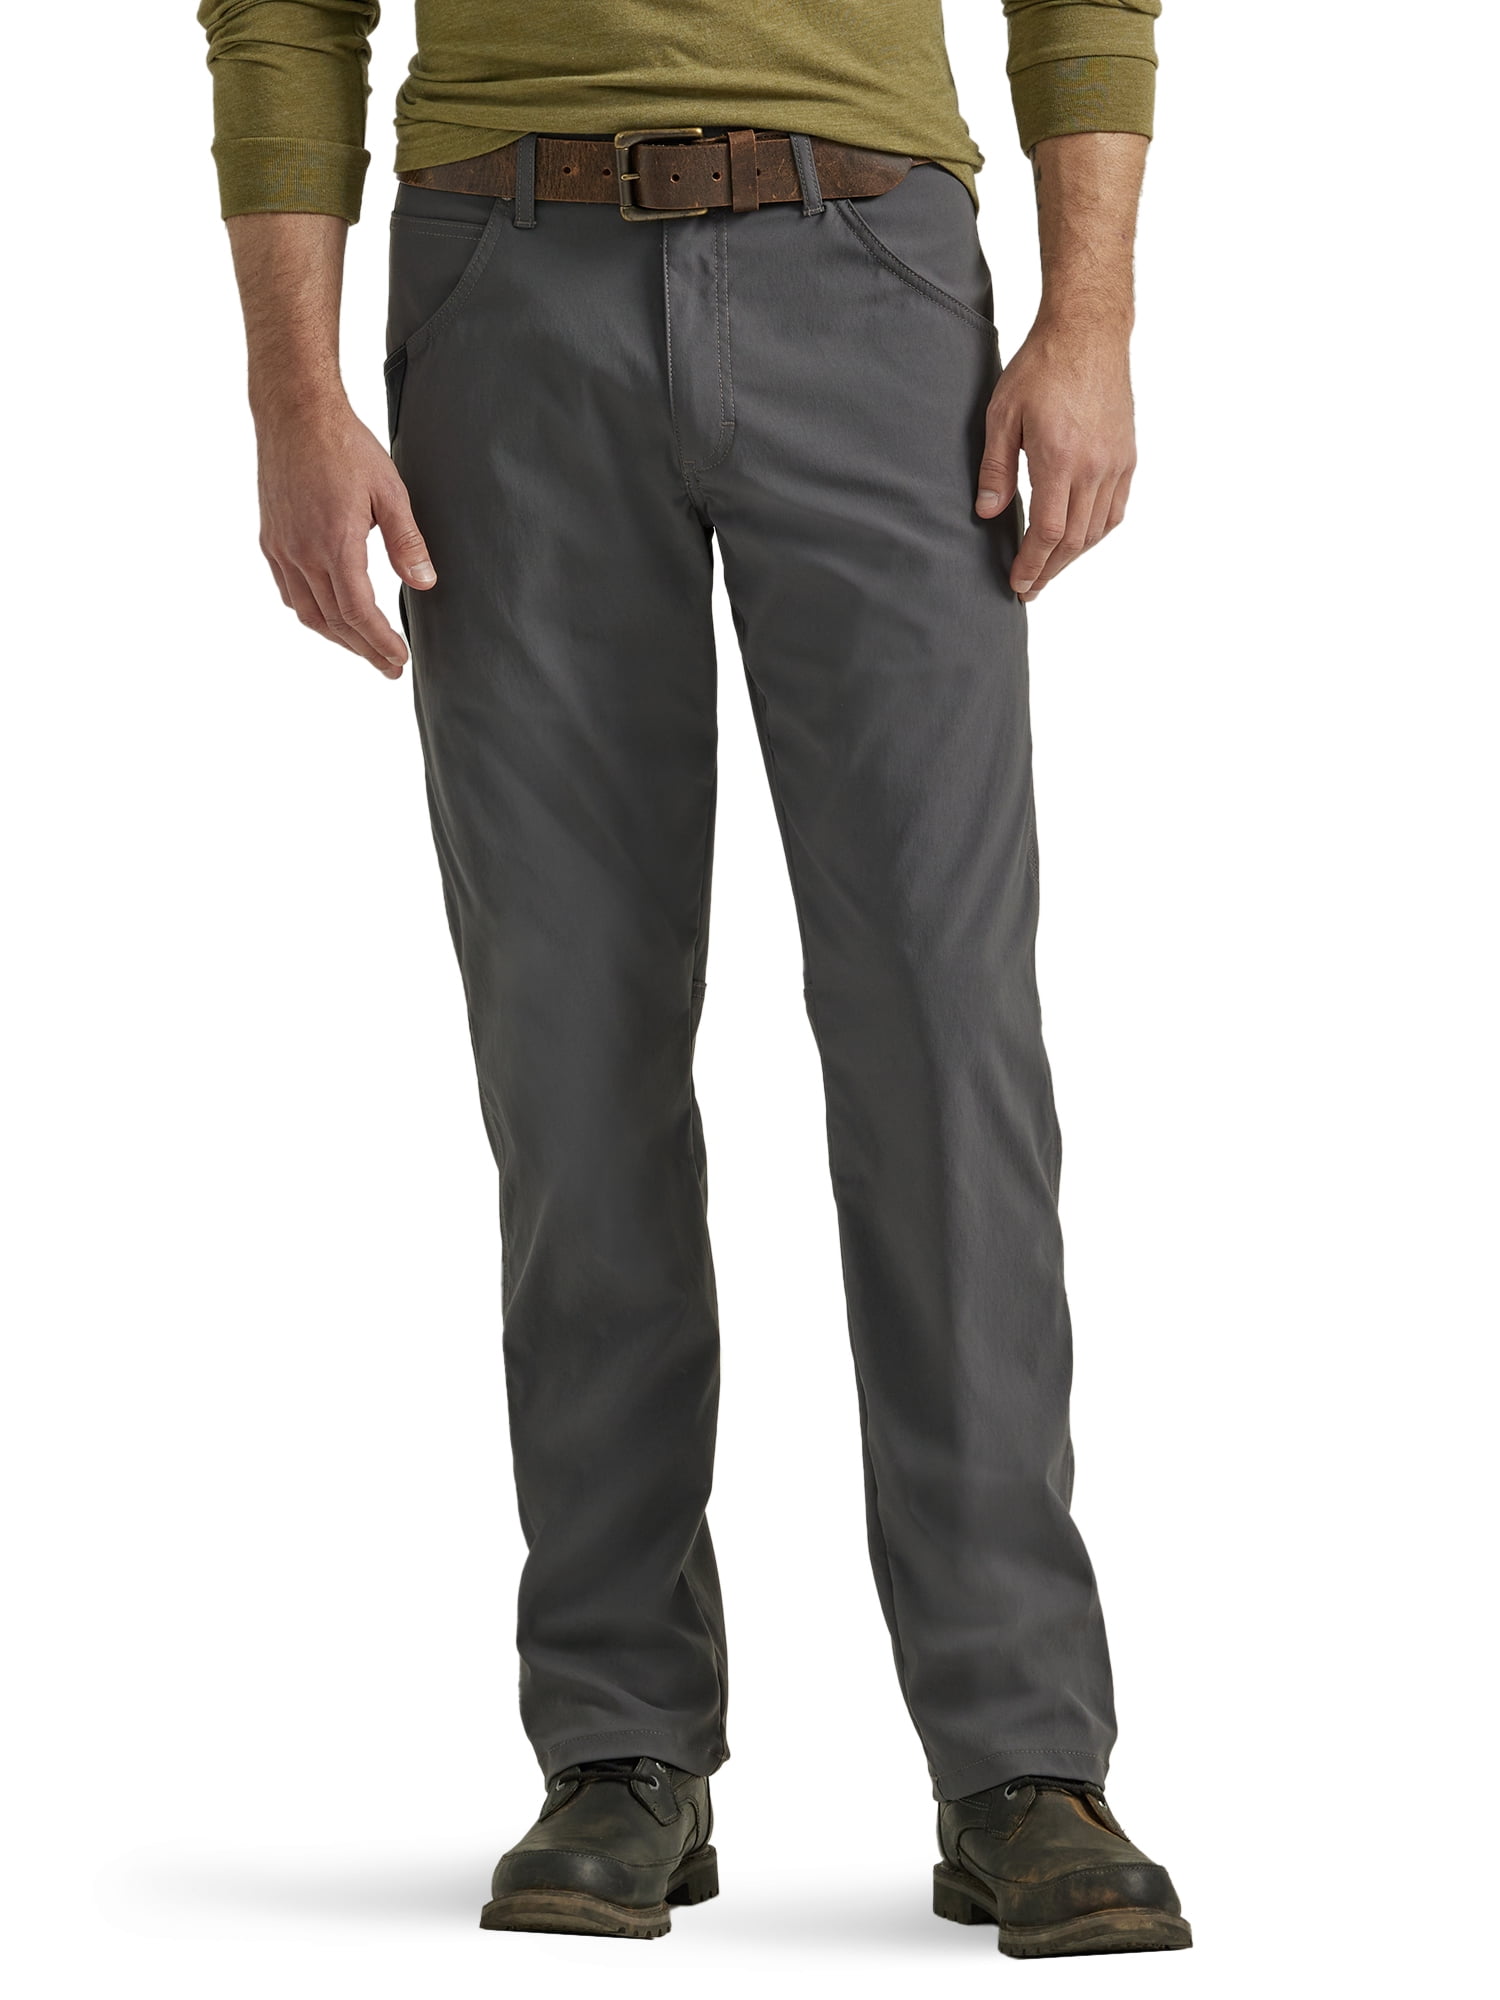 Wrangler® Men's Workwear Performance Utility Pant with Water Repellency ...